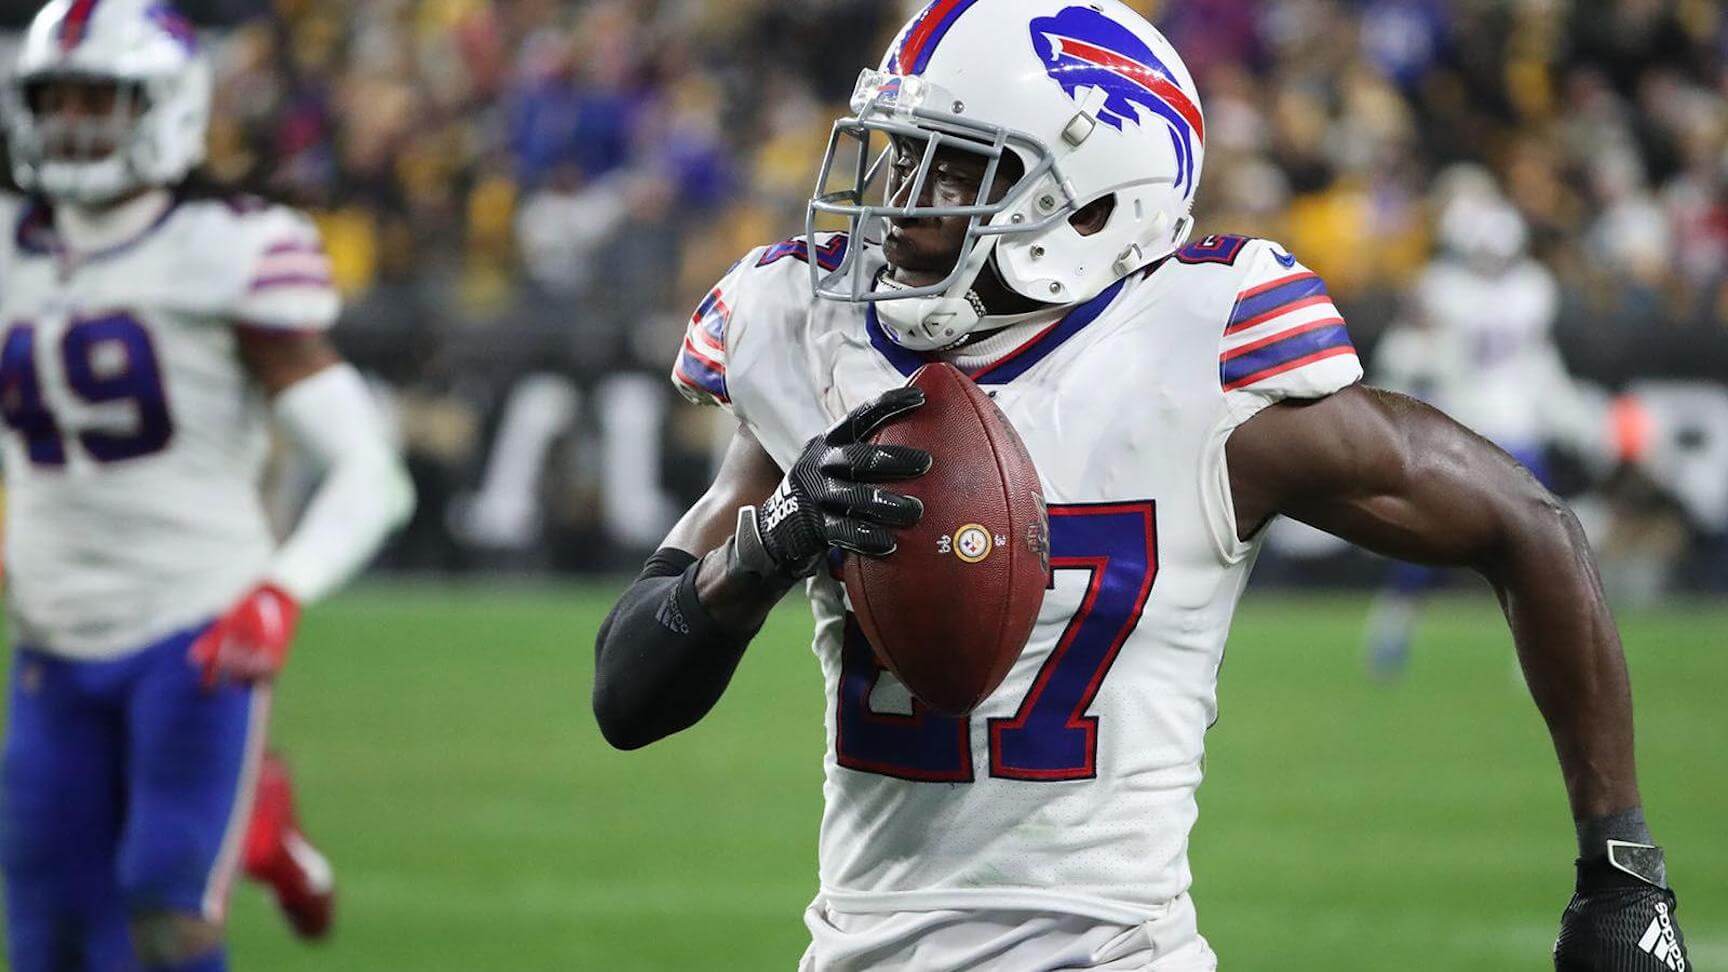 Upon Further Review: Tre'Davious White continues to round into